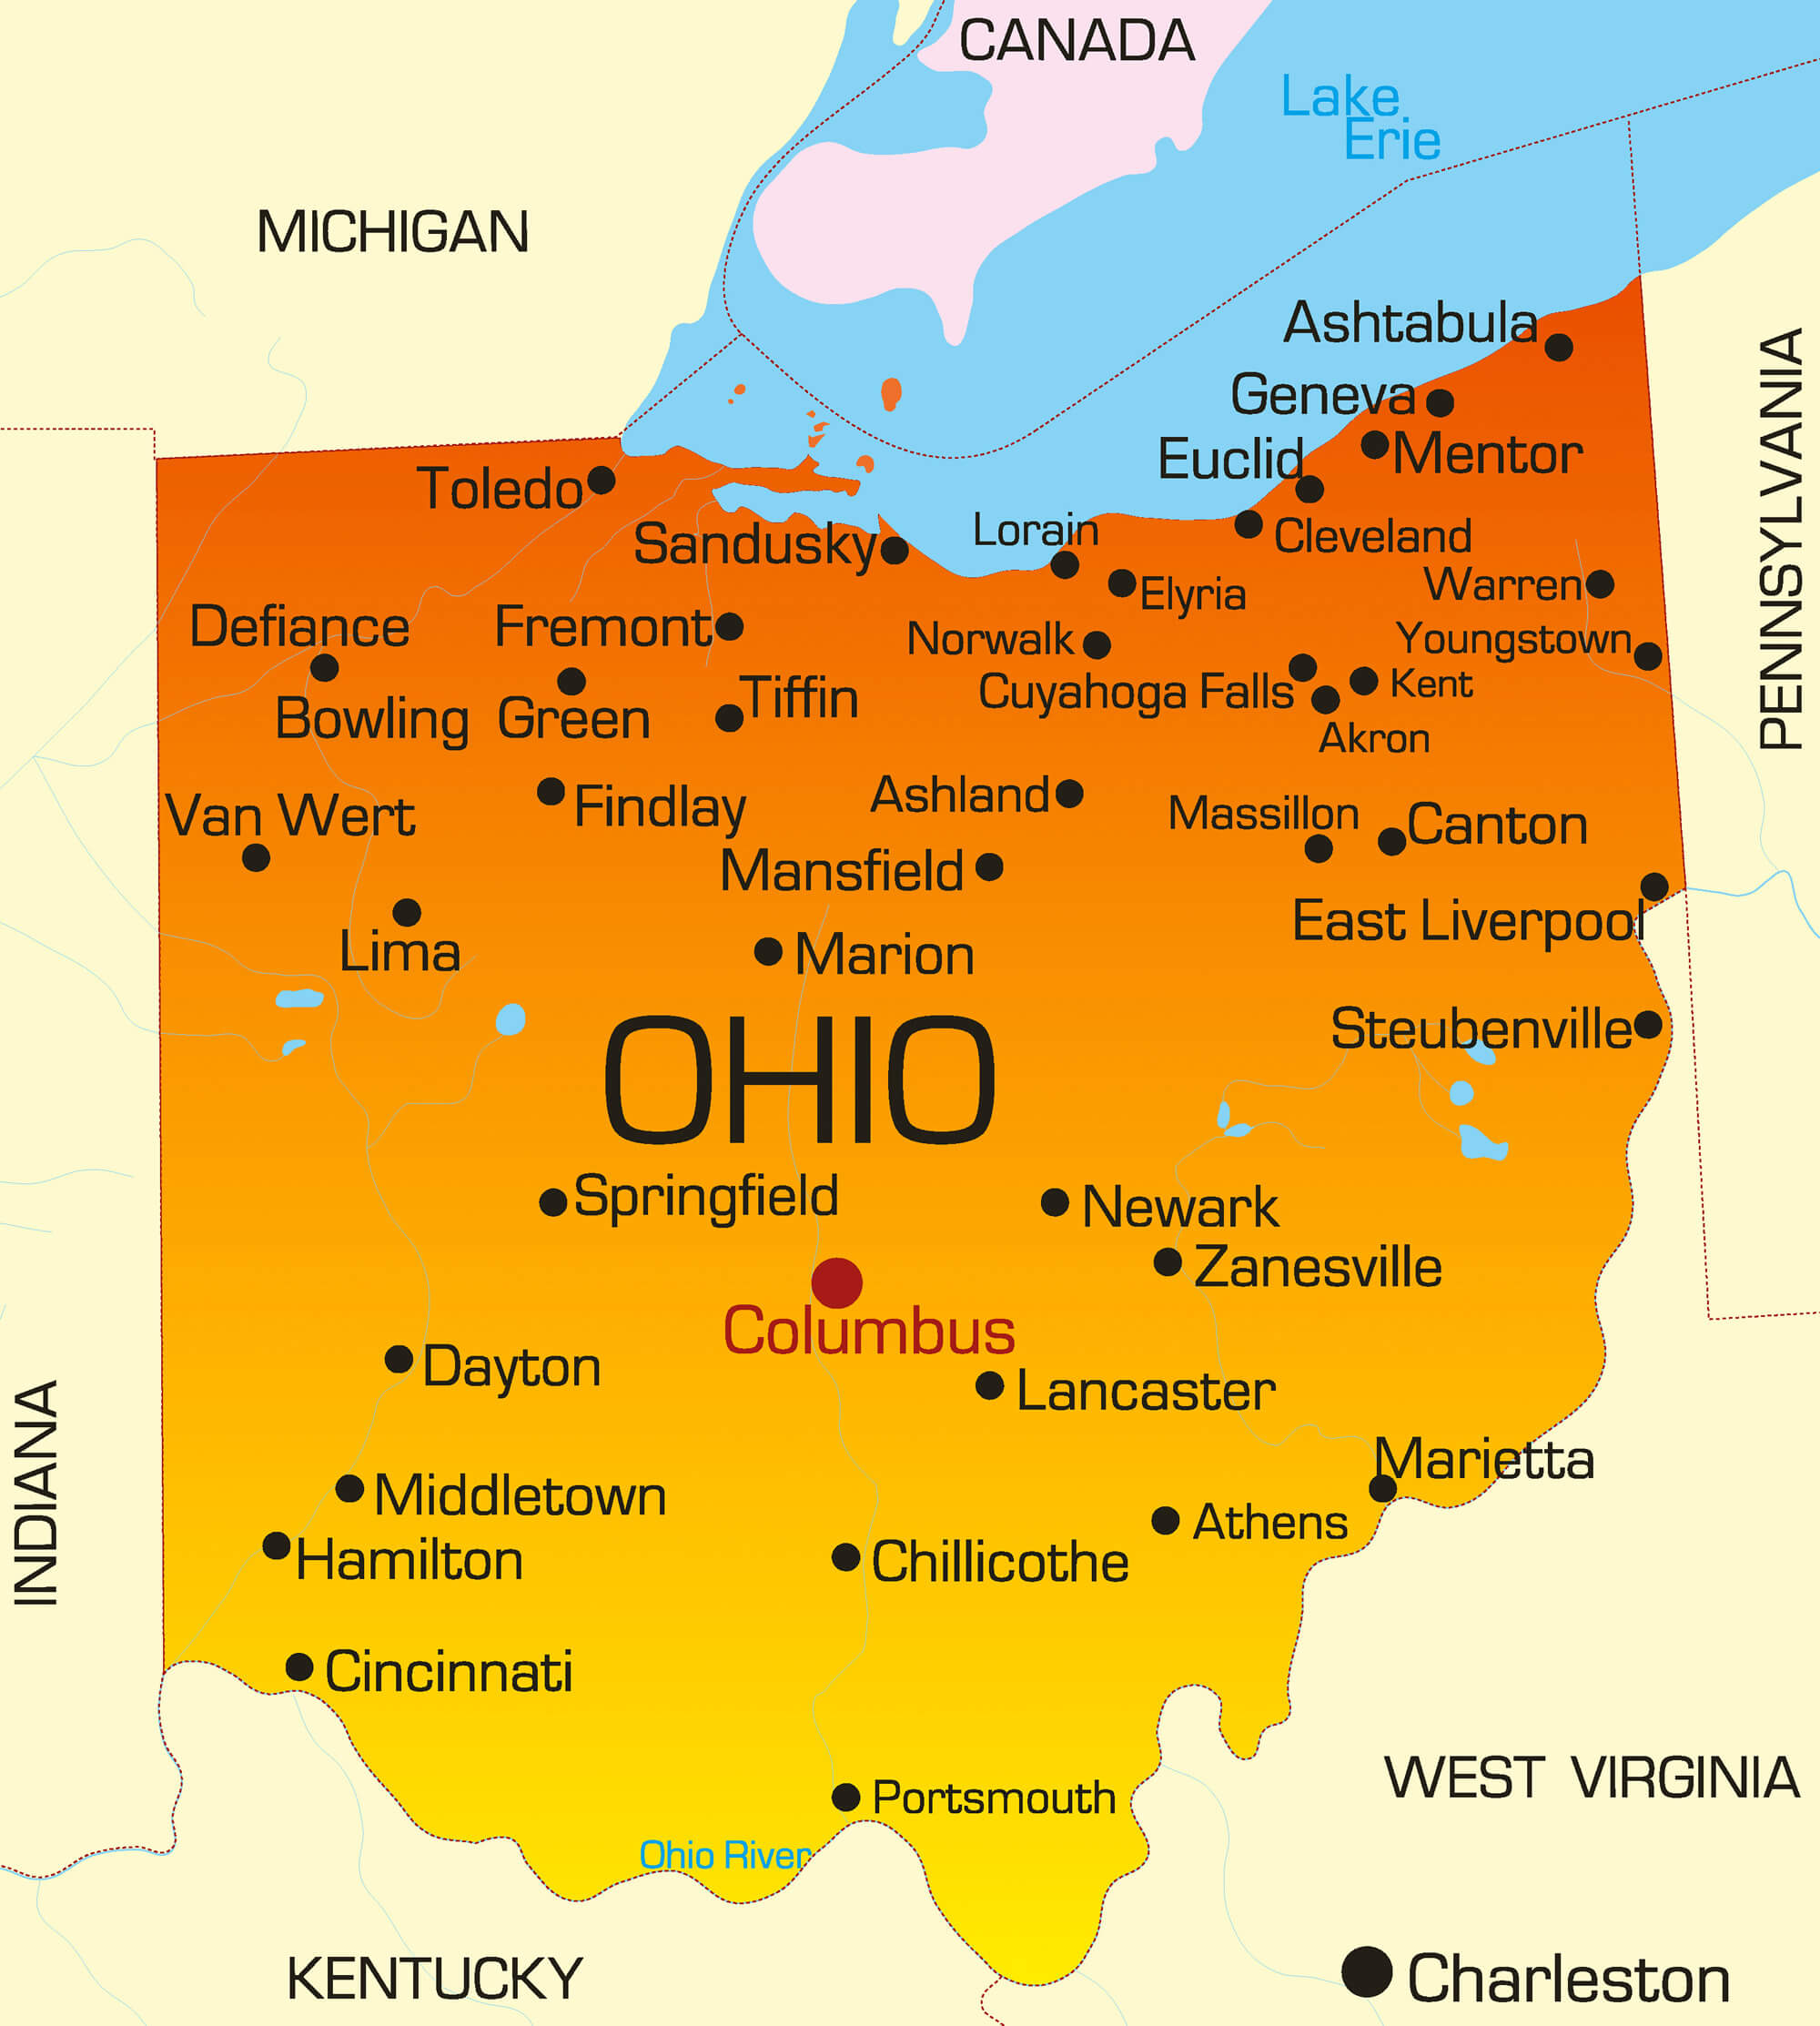 https://www.guideoftheworld.com/wp-content/uploads/2018/03/color_map_of_ohio.jpg